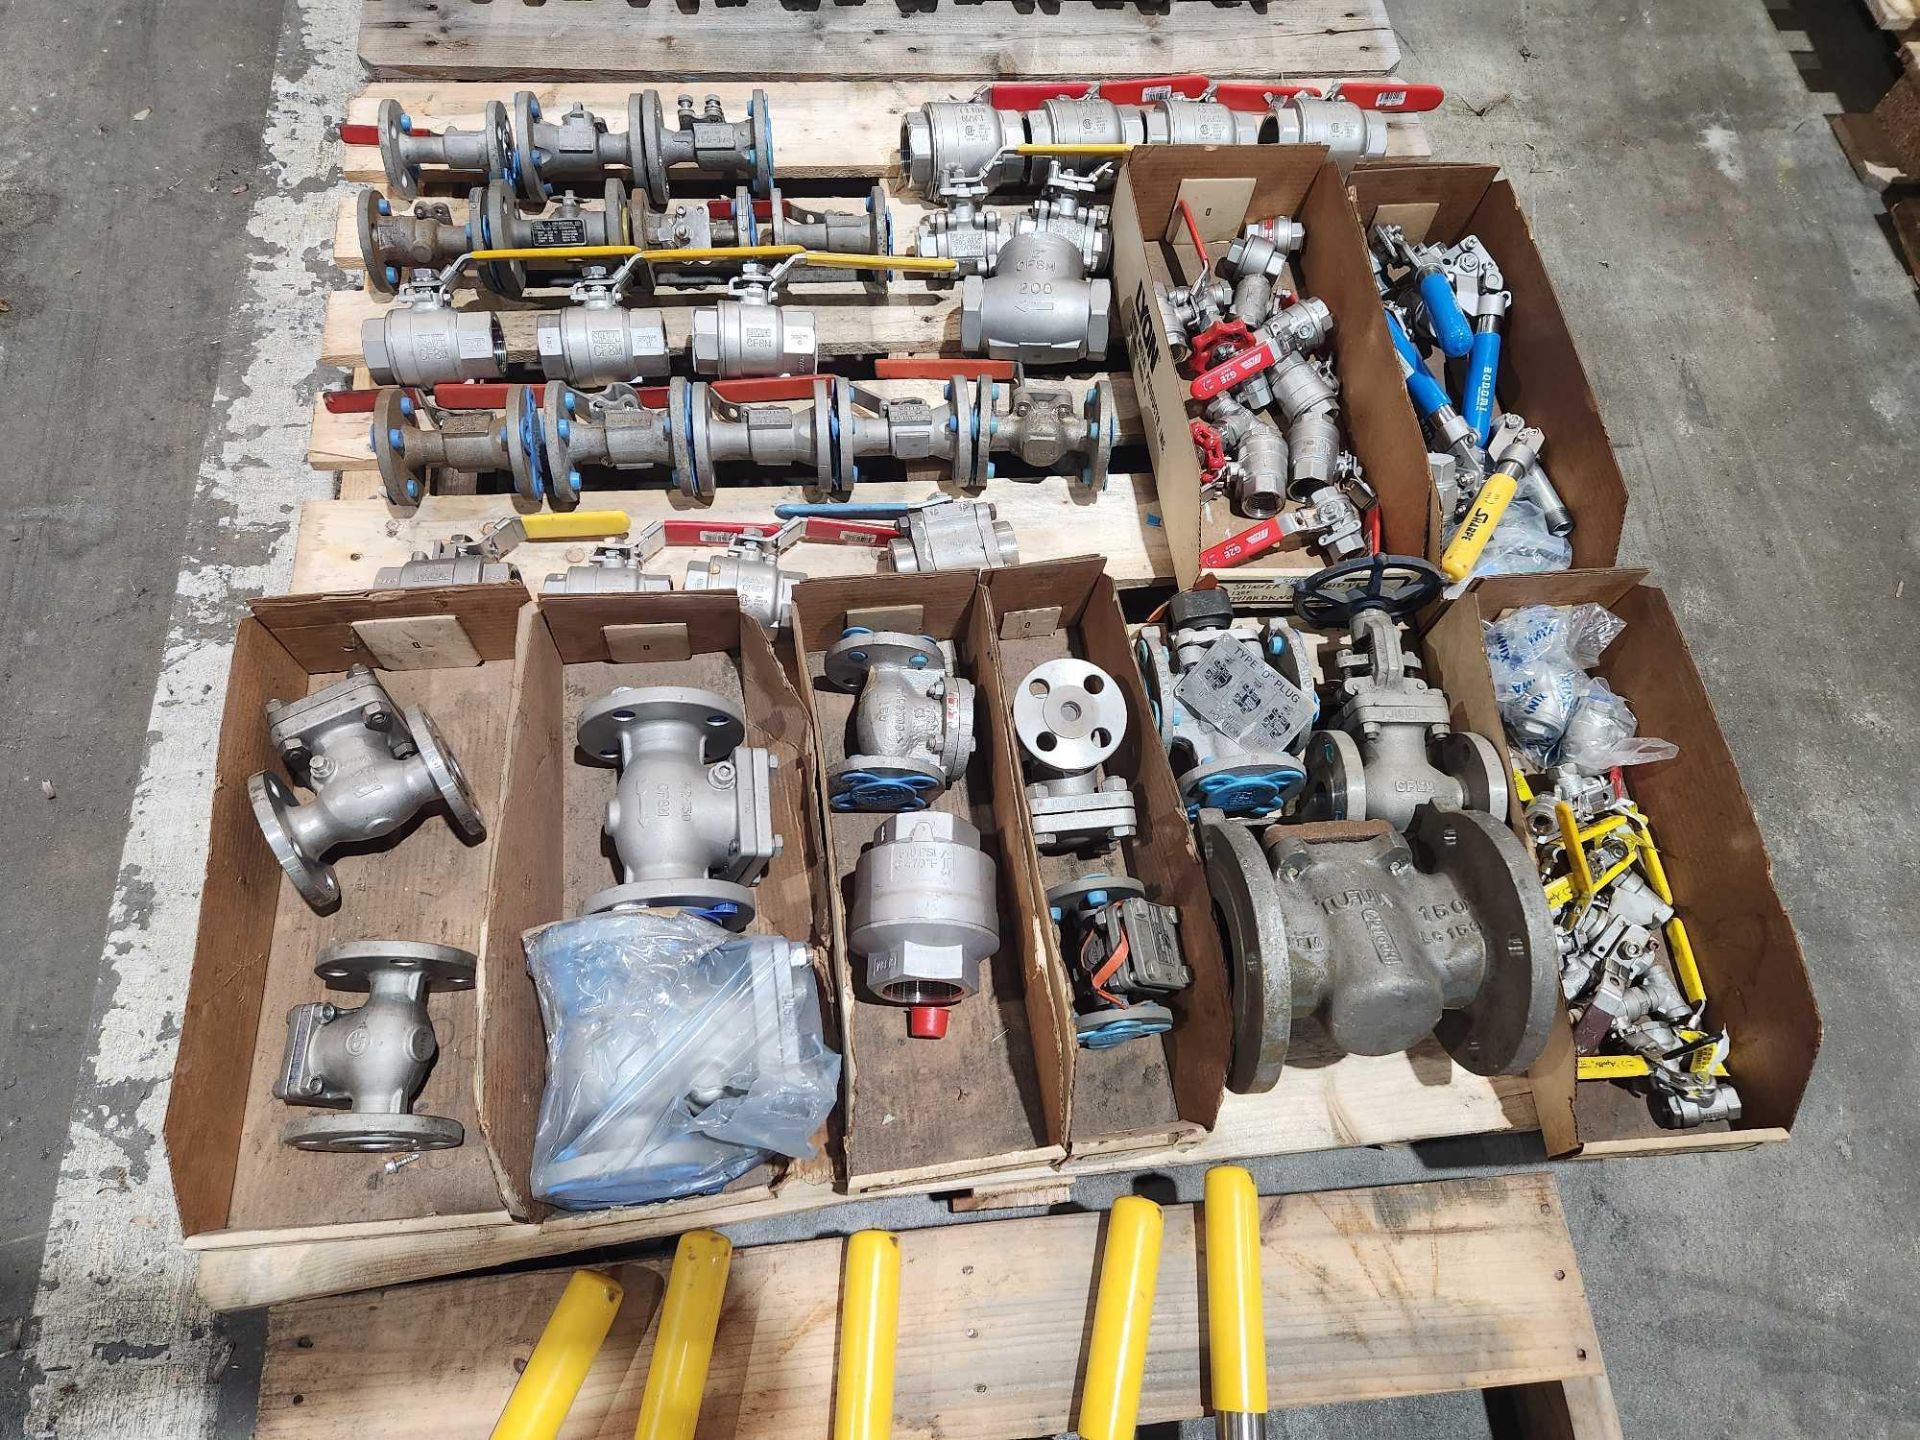 Lot asst stainless steel valves, contents of 3 pallets (WAREHOUSE) - Image 3 of 4